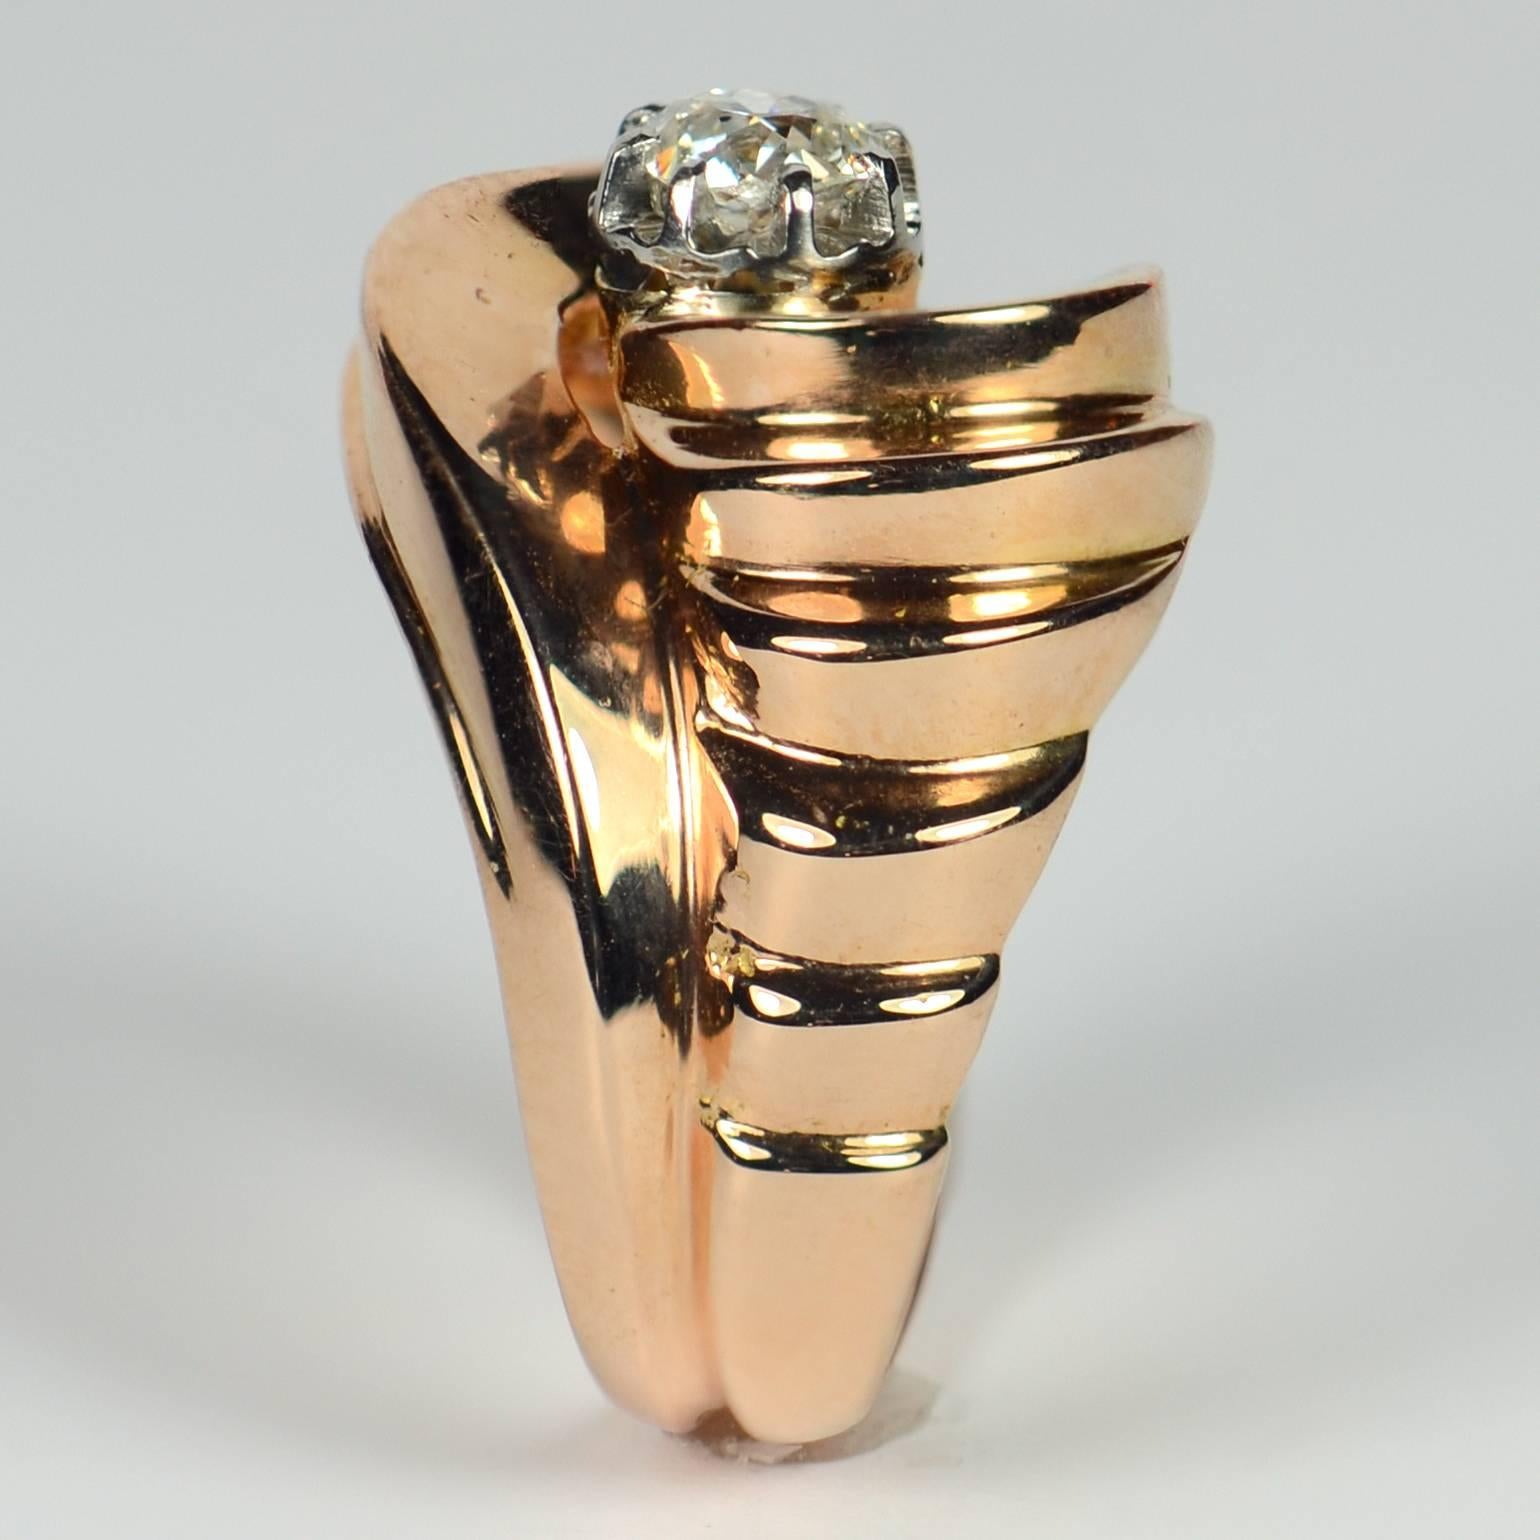 This elegant French 'Tourbillon' Retro ring has a great sculptural feel to it, with asymmetric stepped swirls on each side of the rose gold shank curving to cradle an old cushion-cut diamond weighing approximately 0.35 carats.  

Diamond weight